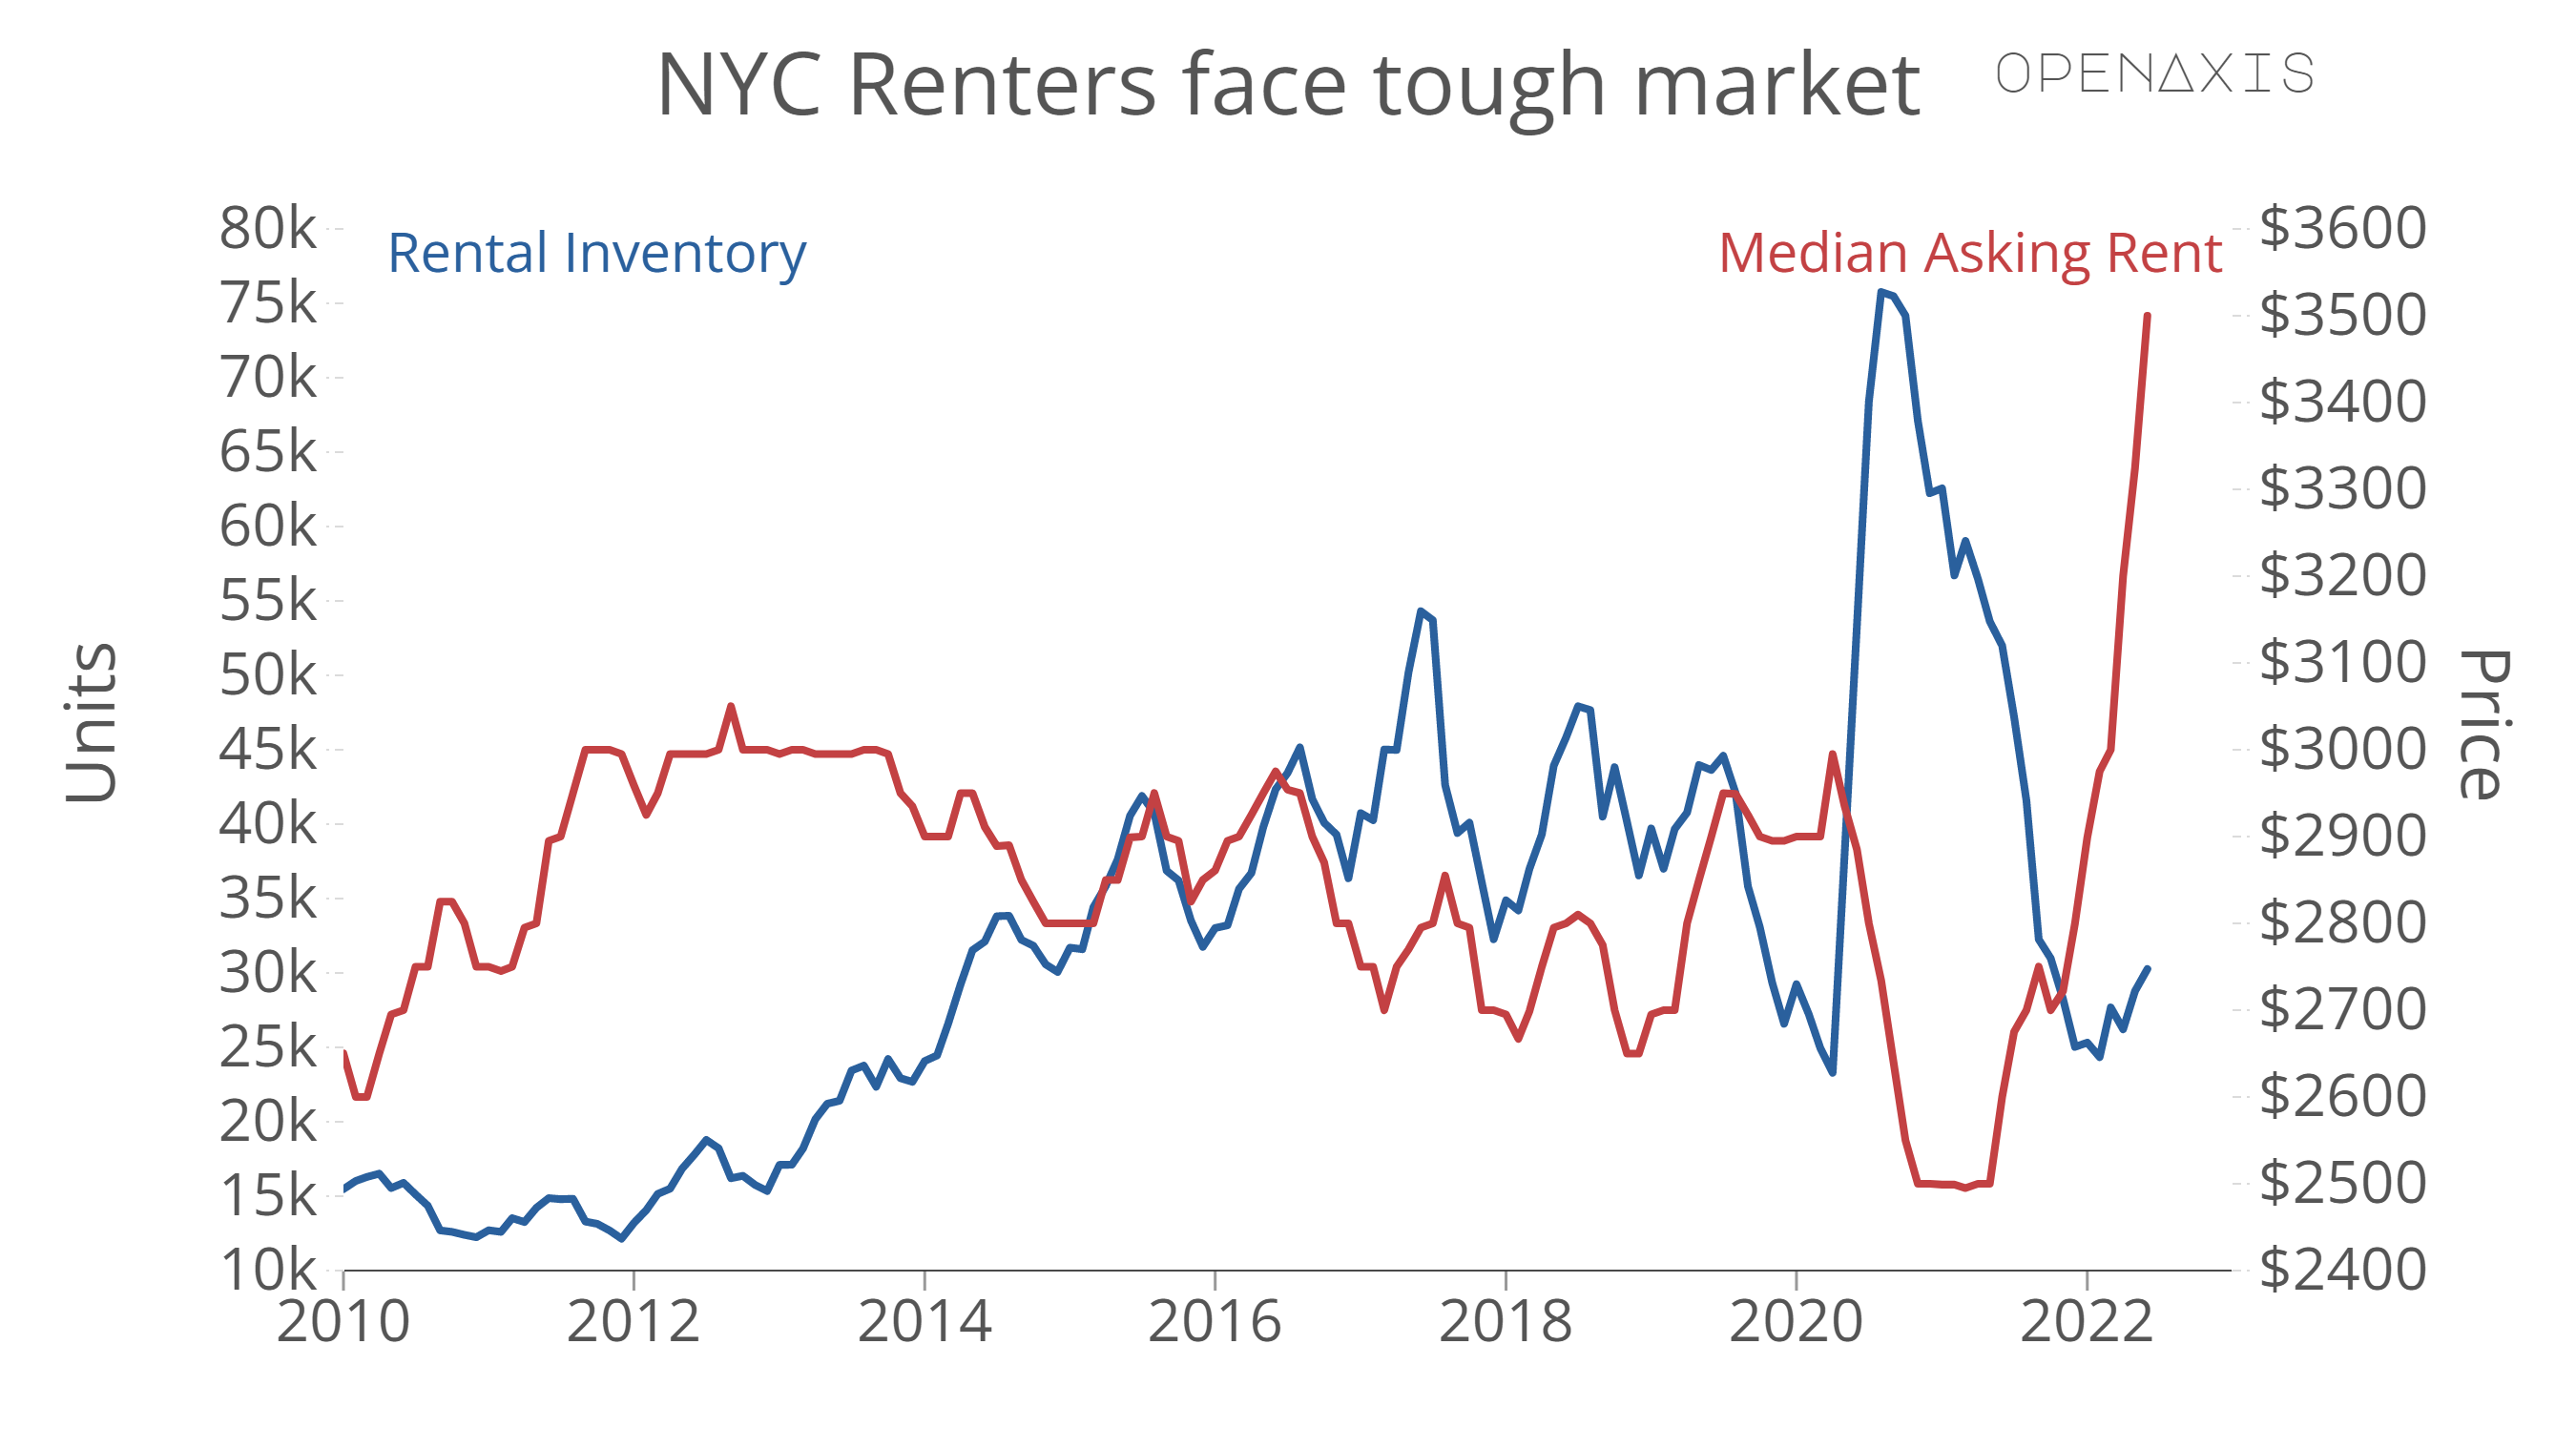 <p>Tenants priced out of their homes likely accounted for more than one-third of NYC rental inventory available in Q2, as landlords looked to make back what they offered in pandemic discounts.</p><p><br /></p><p>As we look to the second half of 2022, renters should expect further increases in rents at least through this summer. NYC is rapidly adjusting to a new normal after the pandemic, but the rental market remains hampered by historically low inventory. Unusually tight rental market conditions suggest rents will continue to rise, at least until a seasonal slowdown in demand occurs for rentals after the summer.</p><p><br /></p><p>Despite gradually improving inventory, asking rents are rising steeply as landlords seek to reverse pandemic-era discounts. Rental demand has remained strong as more people gradually return to the city after a jump in outbound migration during the pandemic. Disappearing rental concessions also suggest landlords remain confident about demand. Meanwhile, priced out of Manhattan, many renters are shifting their search to more affordable areas in Brooklyn and Queens.</p><p><br /></p><p><span data-index="0" data-denotation-char data-id="0" data-value="&lt;a href=&quot;/search?q=%23housing&quot; target=_self&gt;#housing" data-link="/search?q=%23housing">﻿<span contenteditable="false"><span></span><a href="/search?q=%23housing" target="_self">#housing</a></span>﻿</span> <span data-index="0" data-denotation-char data-id="0" data-value="&lt;a href=&quot;/search?q=%23rental&quot; target=_self&gt;#rental" data-link="/search?q=%23rental">﻿<span contenteditable="false"><span></span><a href="/search?q=%23rental" target="_self">#rental</a></span>﻿</span></p><p><br /></p><p>Source: <a href="/data/3998" target="_blank">StreetEasy</a></p><p><br /></p>